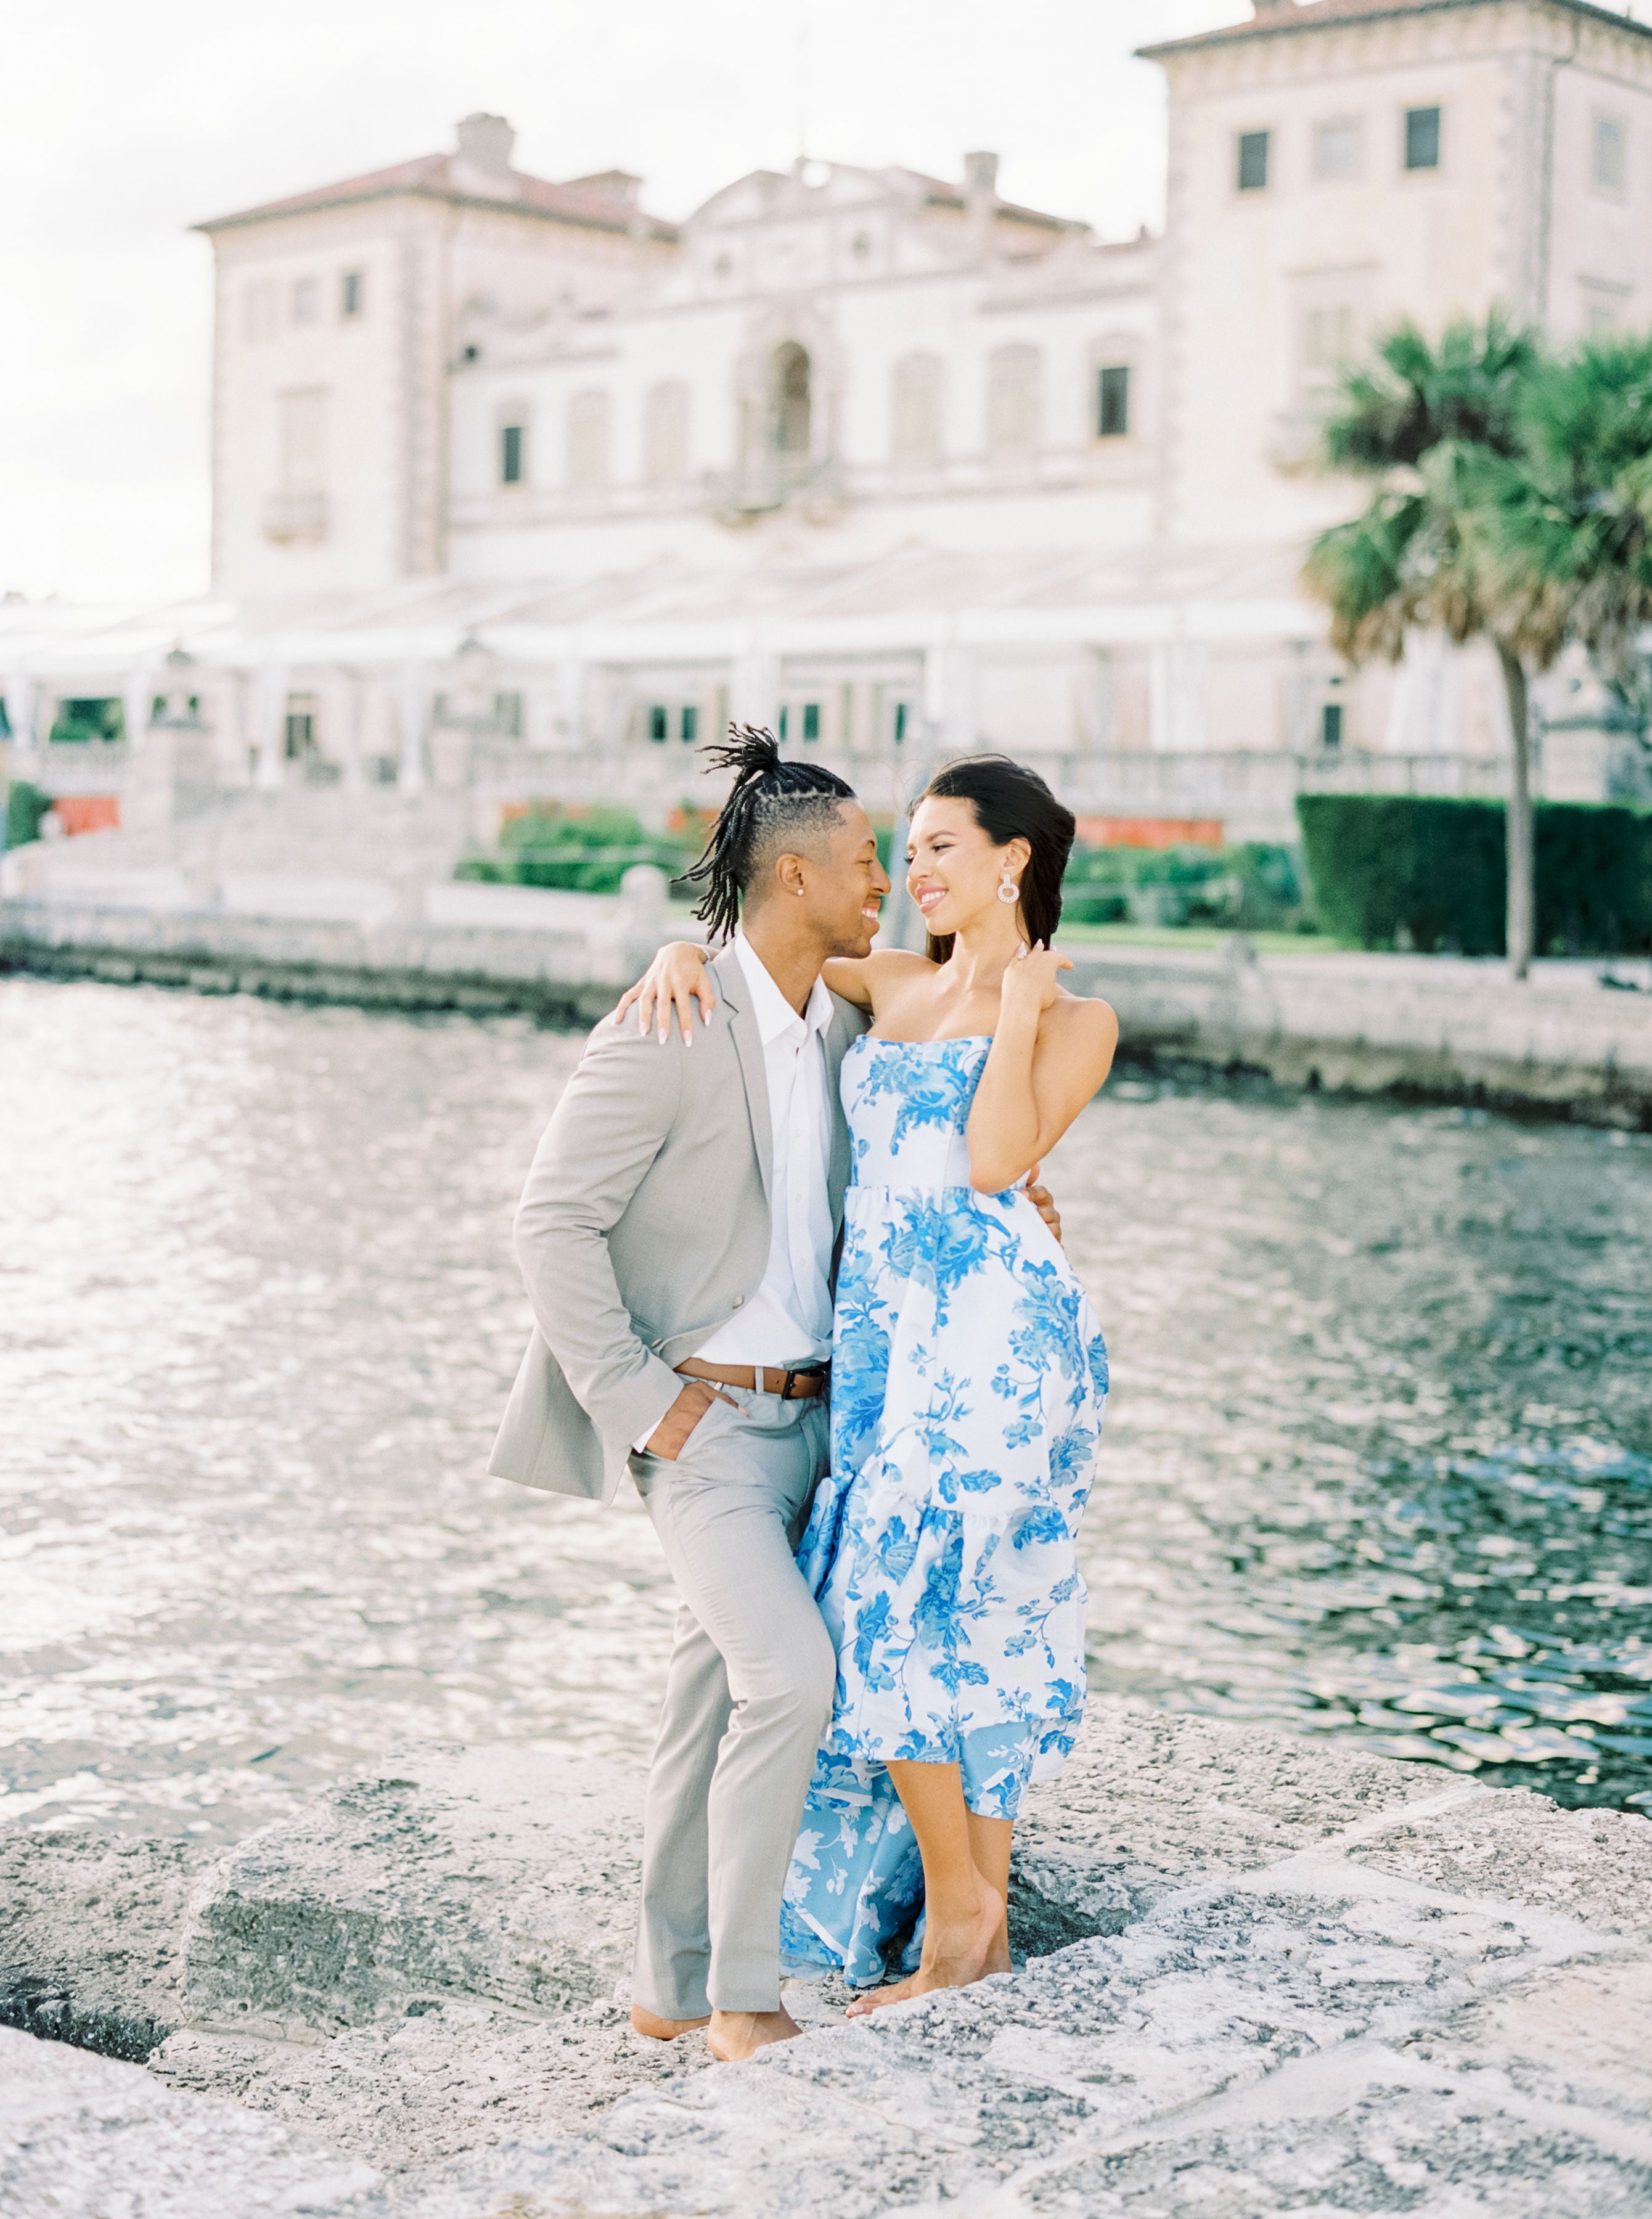 the top 5 spots in charleston, sc to pop the question: an in-depth guide